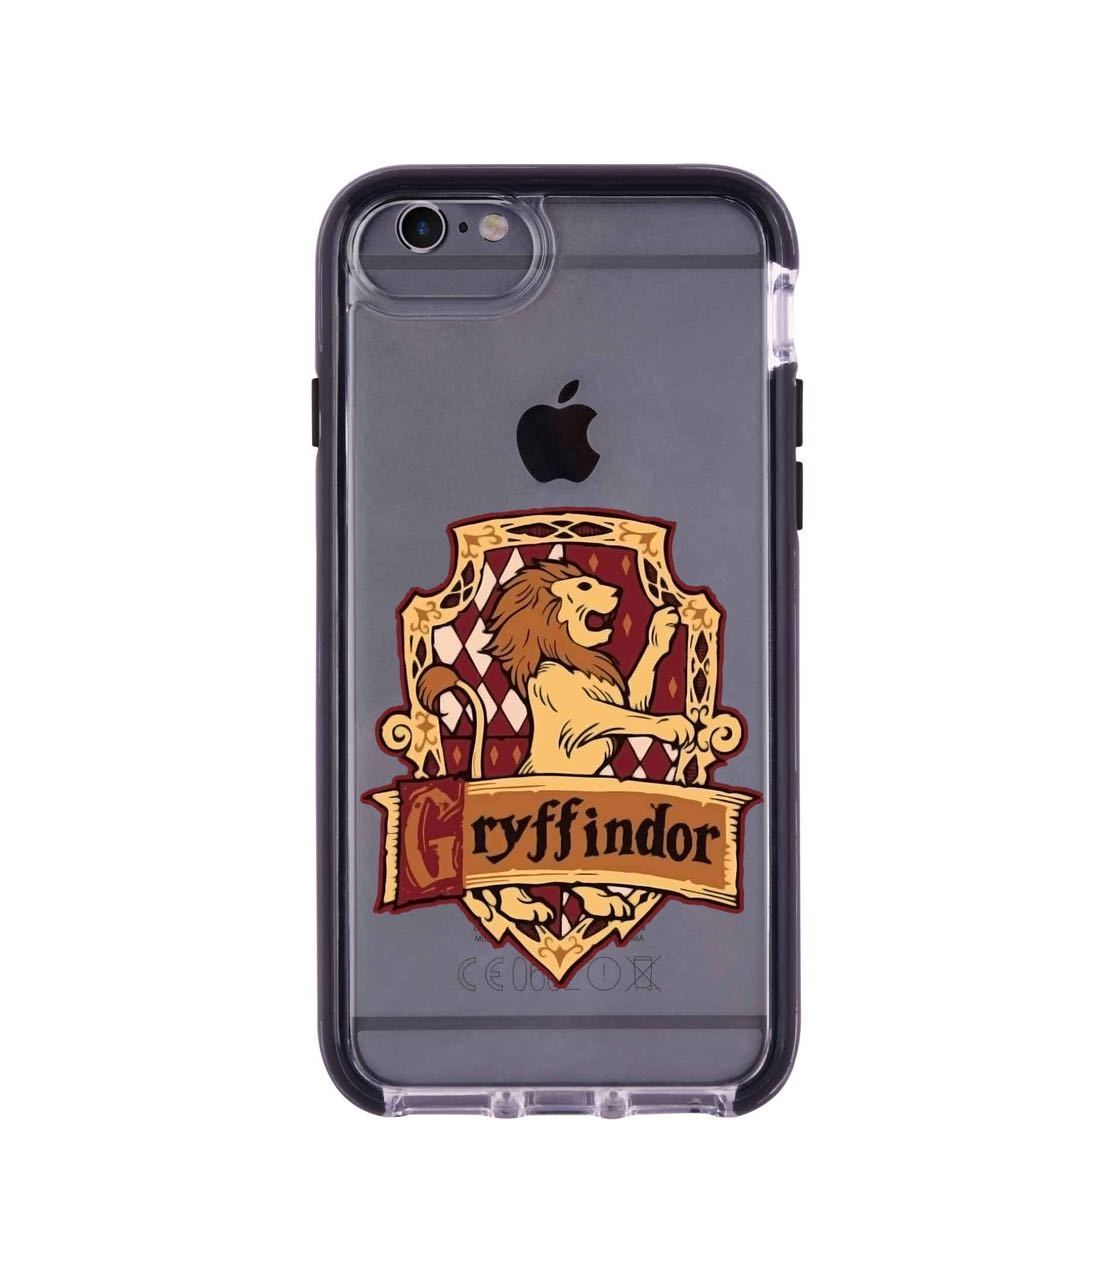 Crest Gryffindor - Extreme Phone Case for iPhone 6S Plus